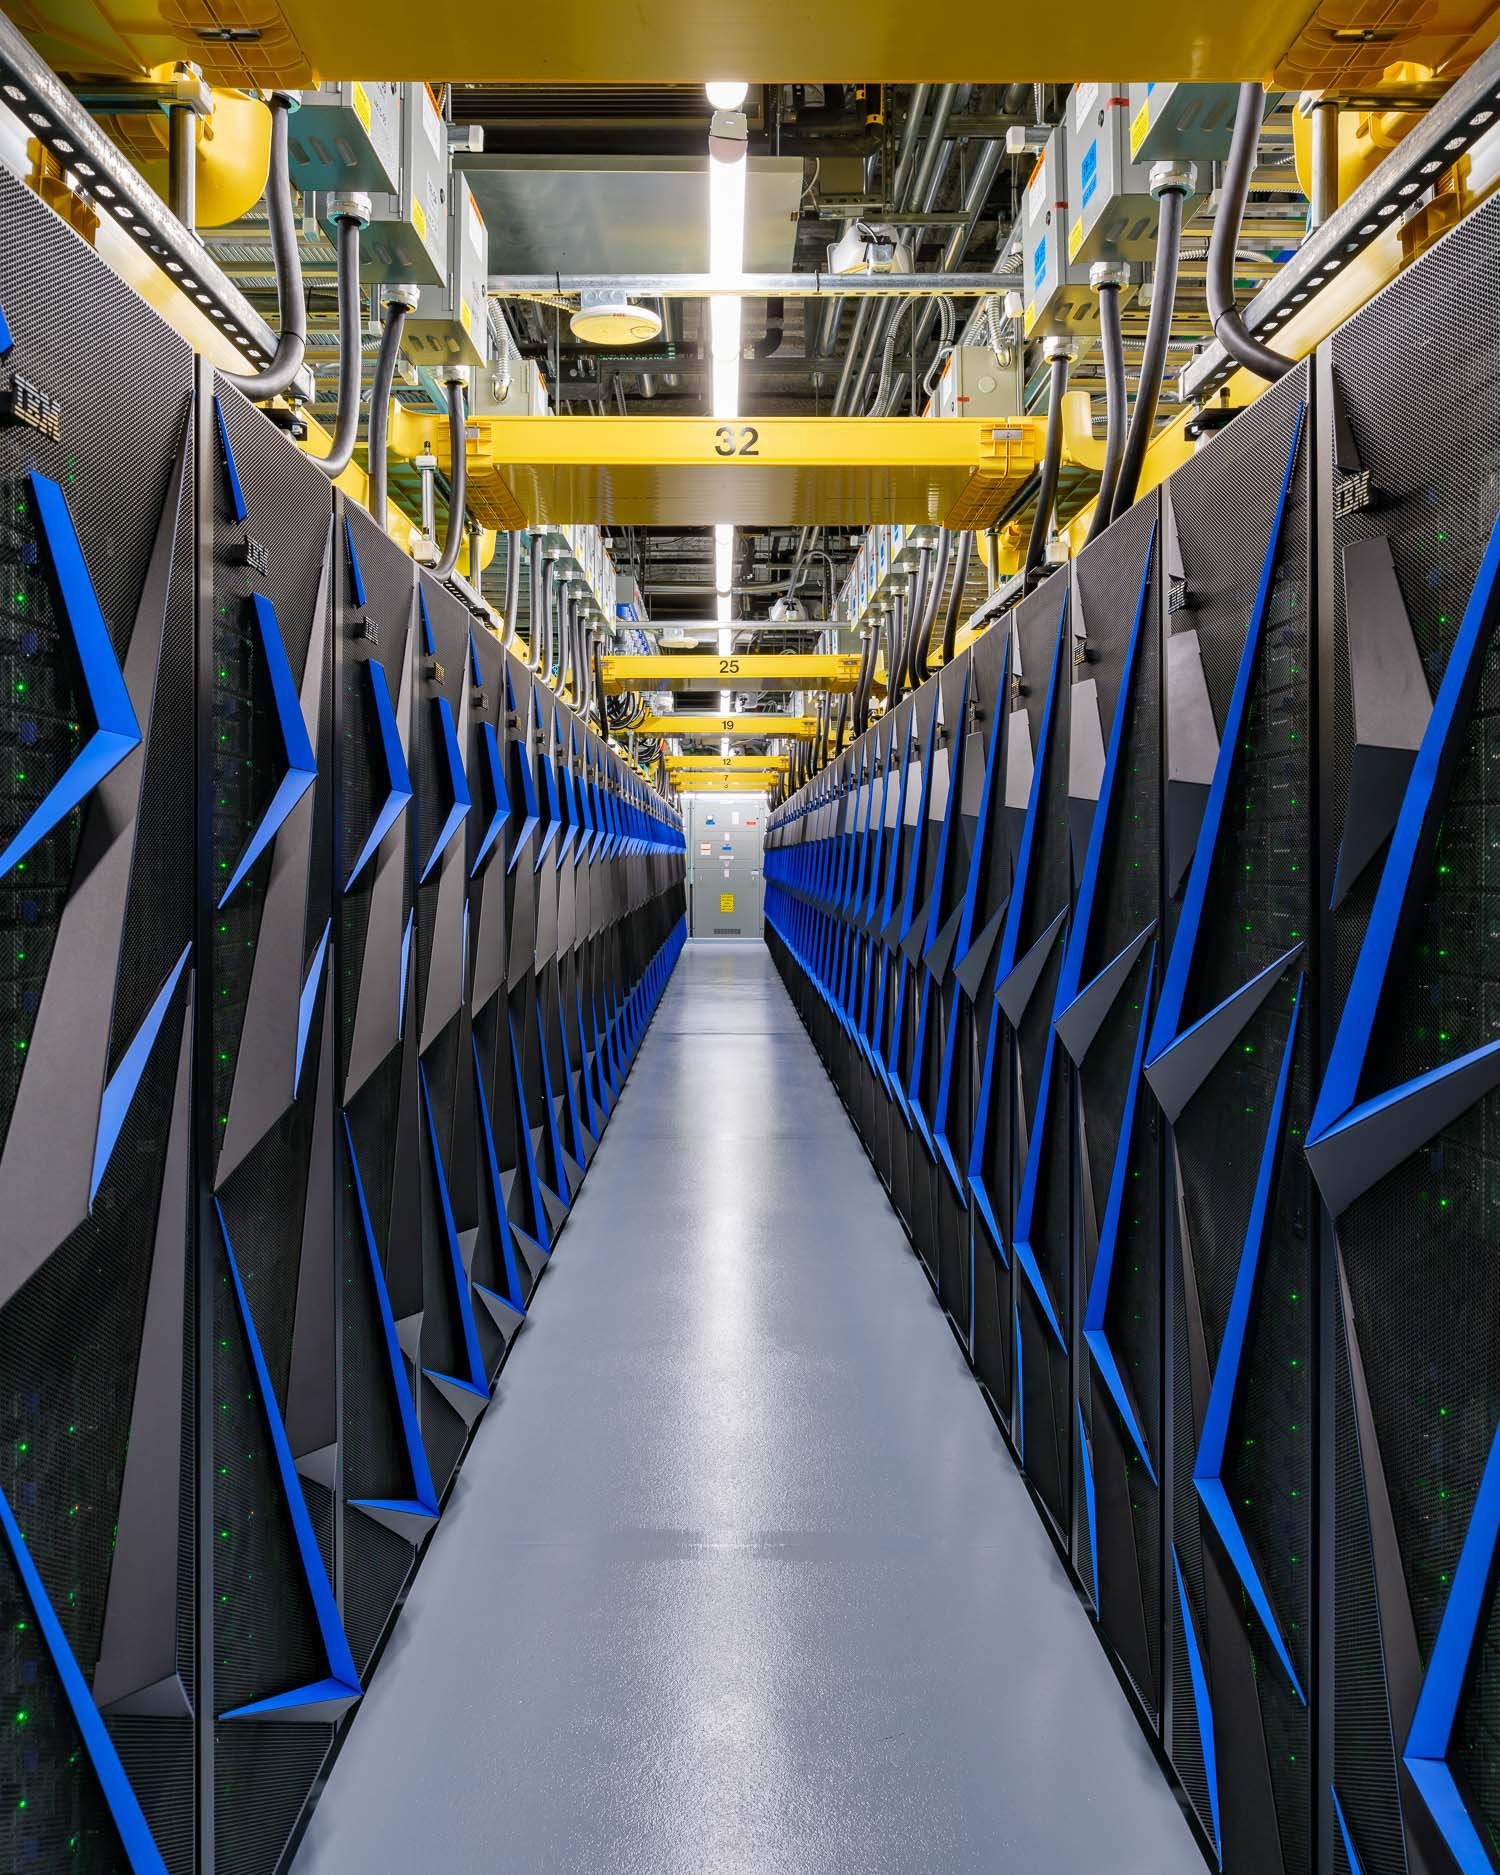  Summit, the former fastest supercomputer in the world (it is currently 4th) at Oak Ridge National Laboratory. Summit provides scientists and researchers the opportunity to solve complex tasks in the fields of energy, artificial intelligence, human h